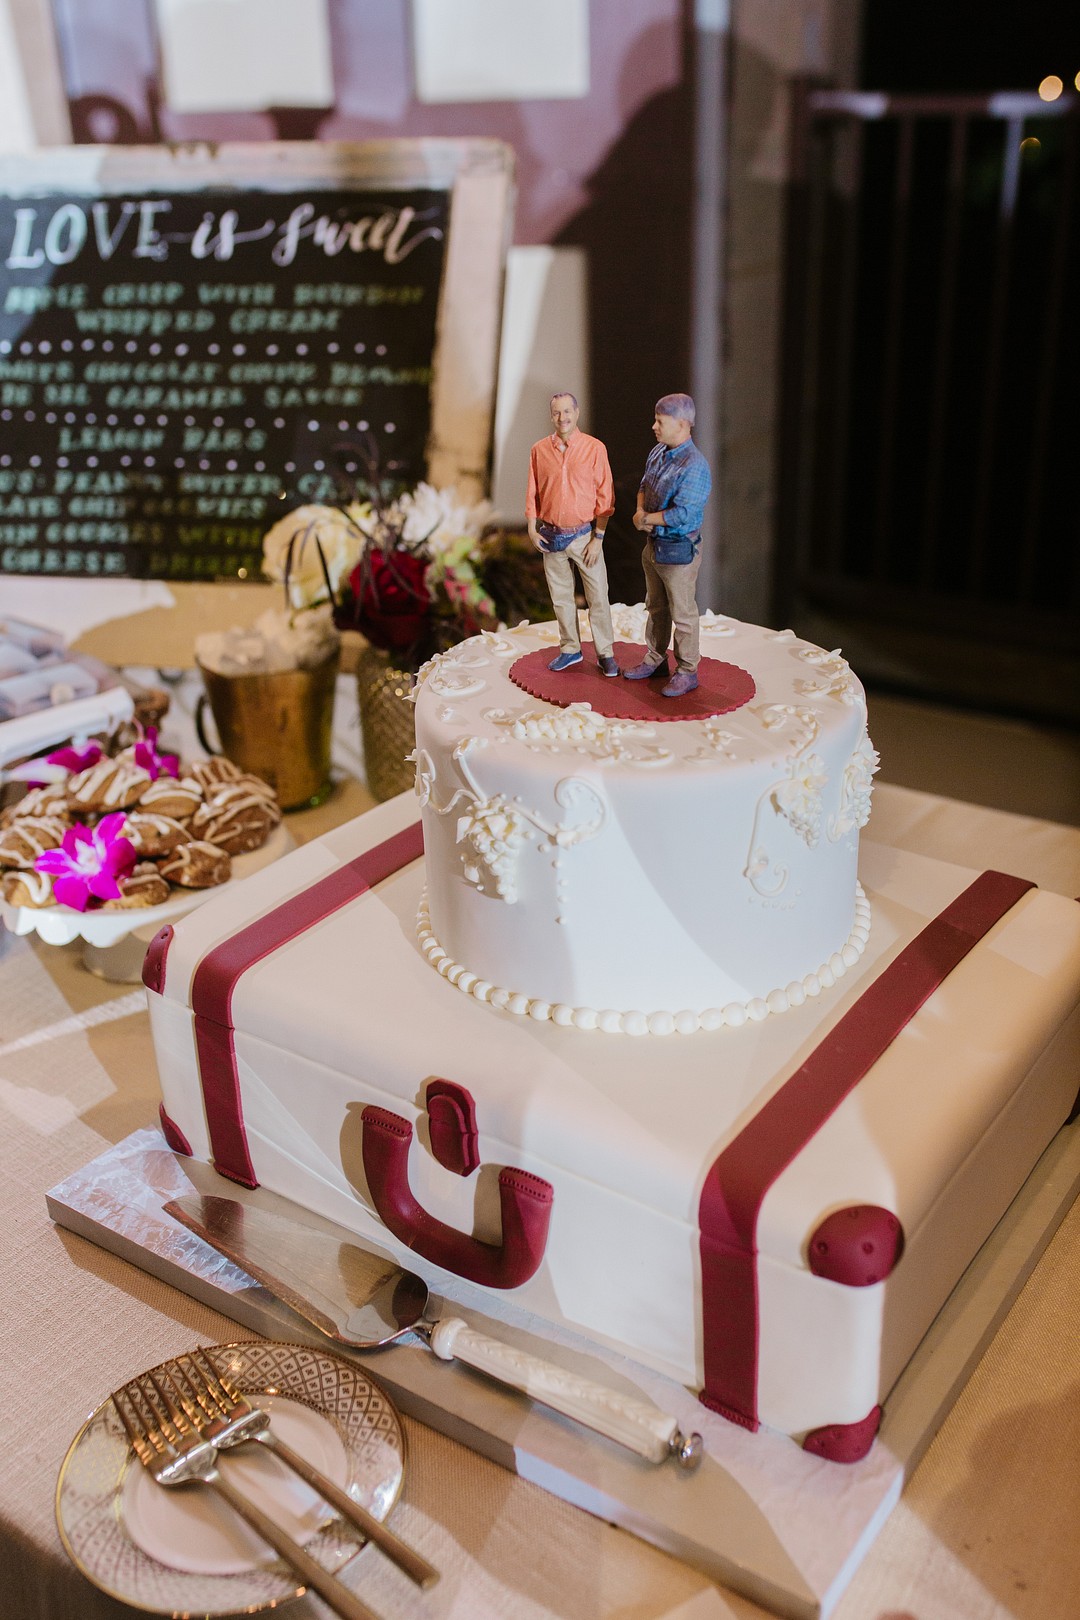 After 20 years, two grooms celebrate with whimsical winery wedding LGBTQ+ weddings aerialist gay wedding purple tux gold glitter tux fall California wedding wine country cake travel suitcase